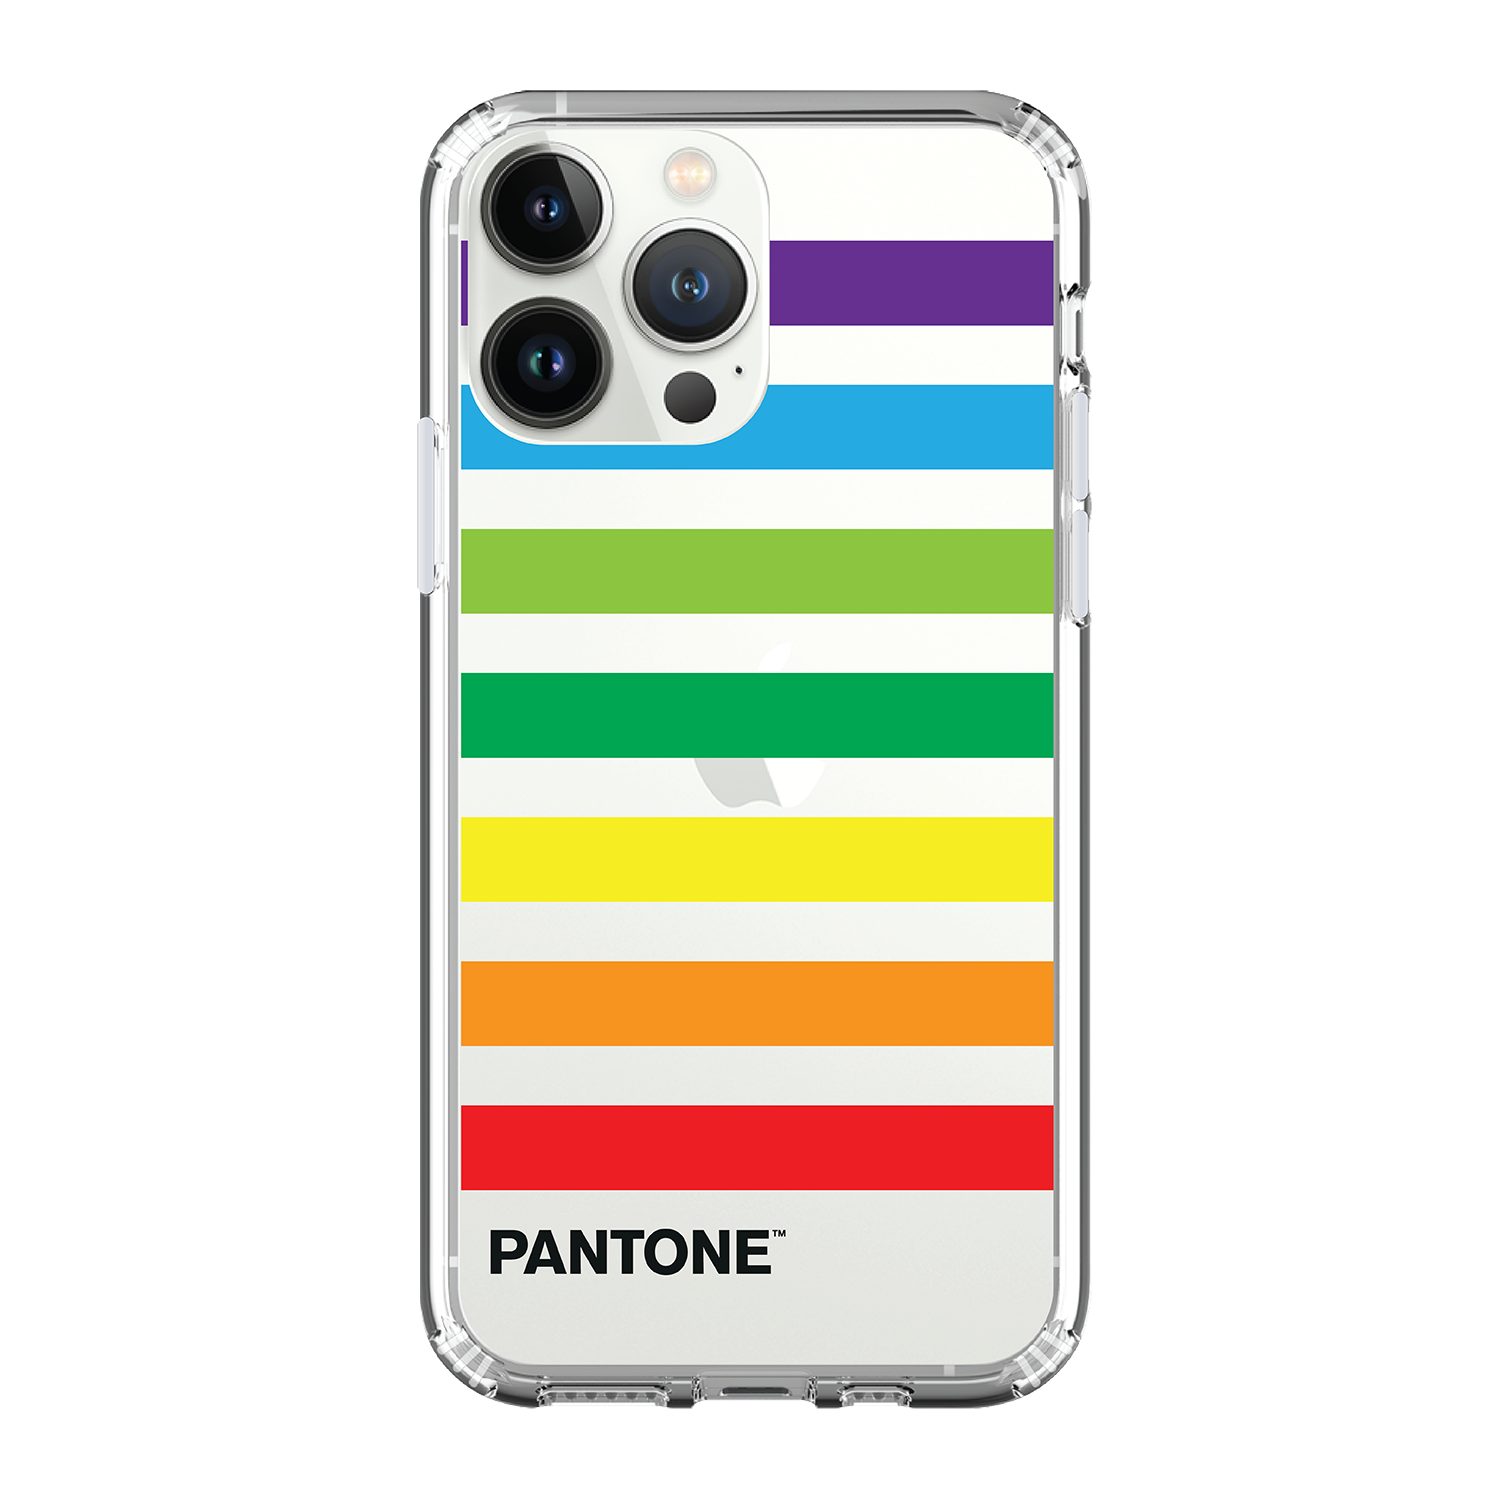 PANTONE Clear Case / iPhone Case / Android Case / Samsung Case 正版授權 全包邊氣囊防撞手機殼 (PE10)